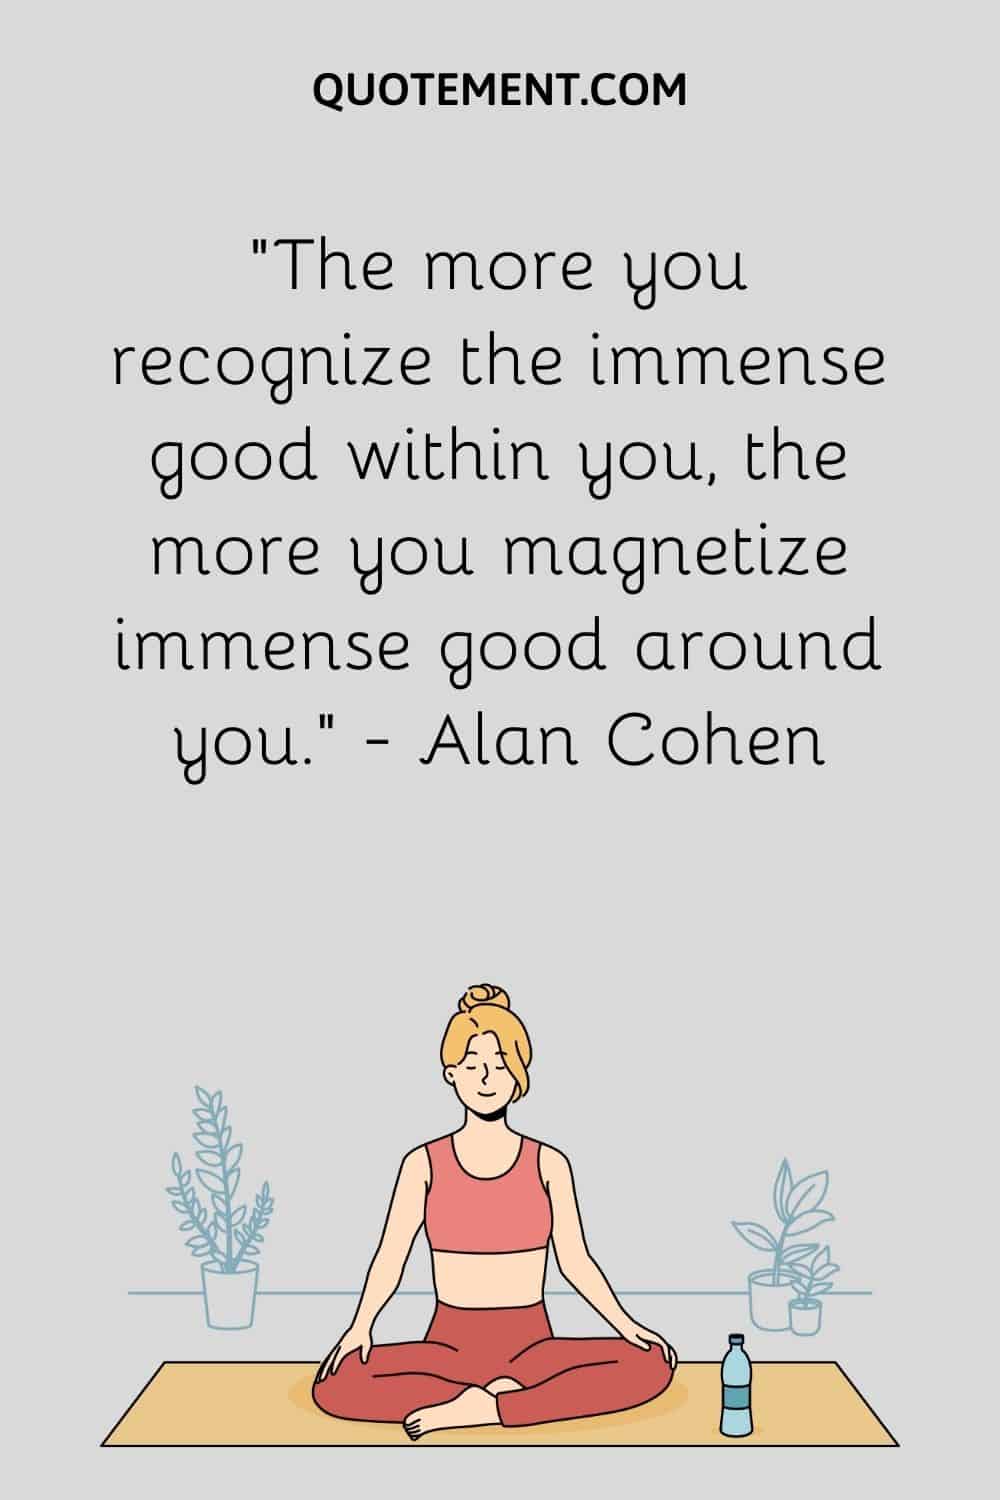 The more you recognize the immense good within you, the more you magnetize immense good around you